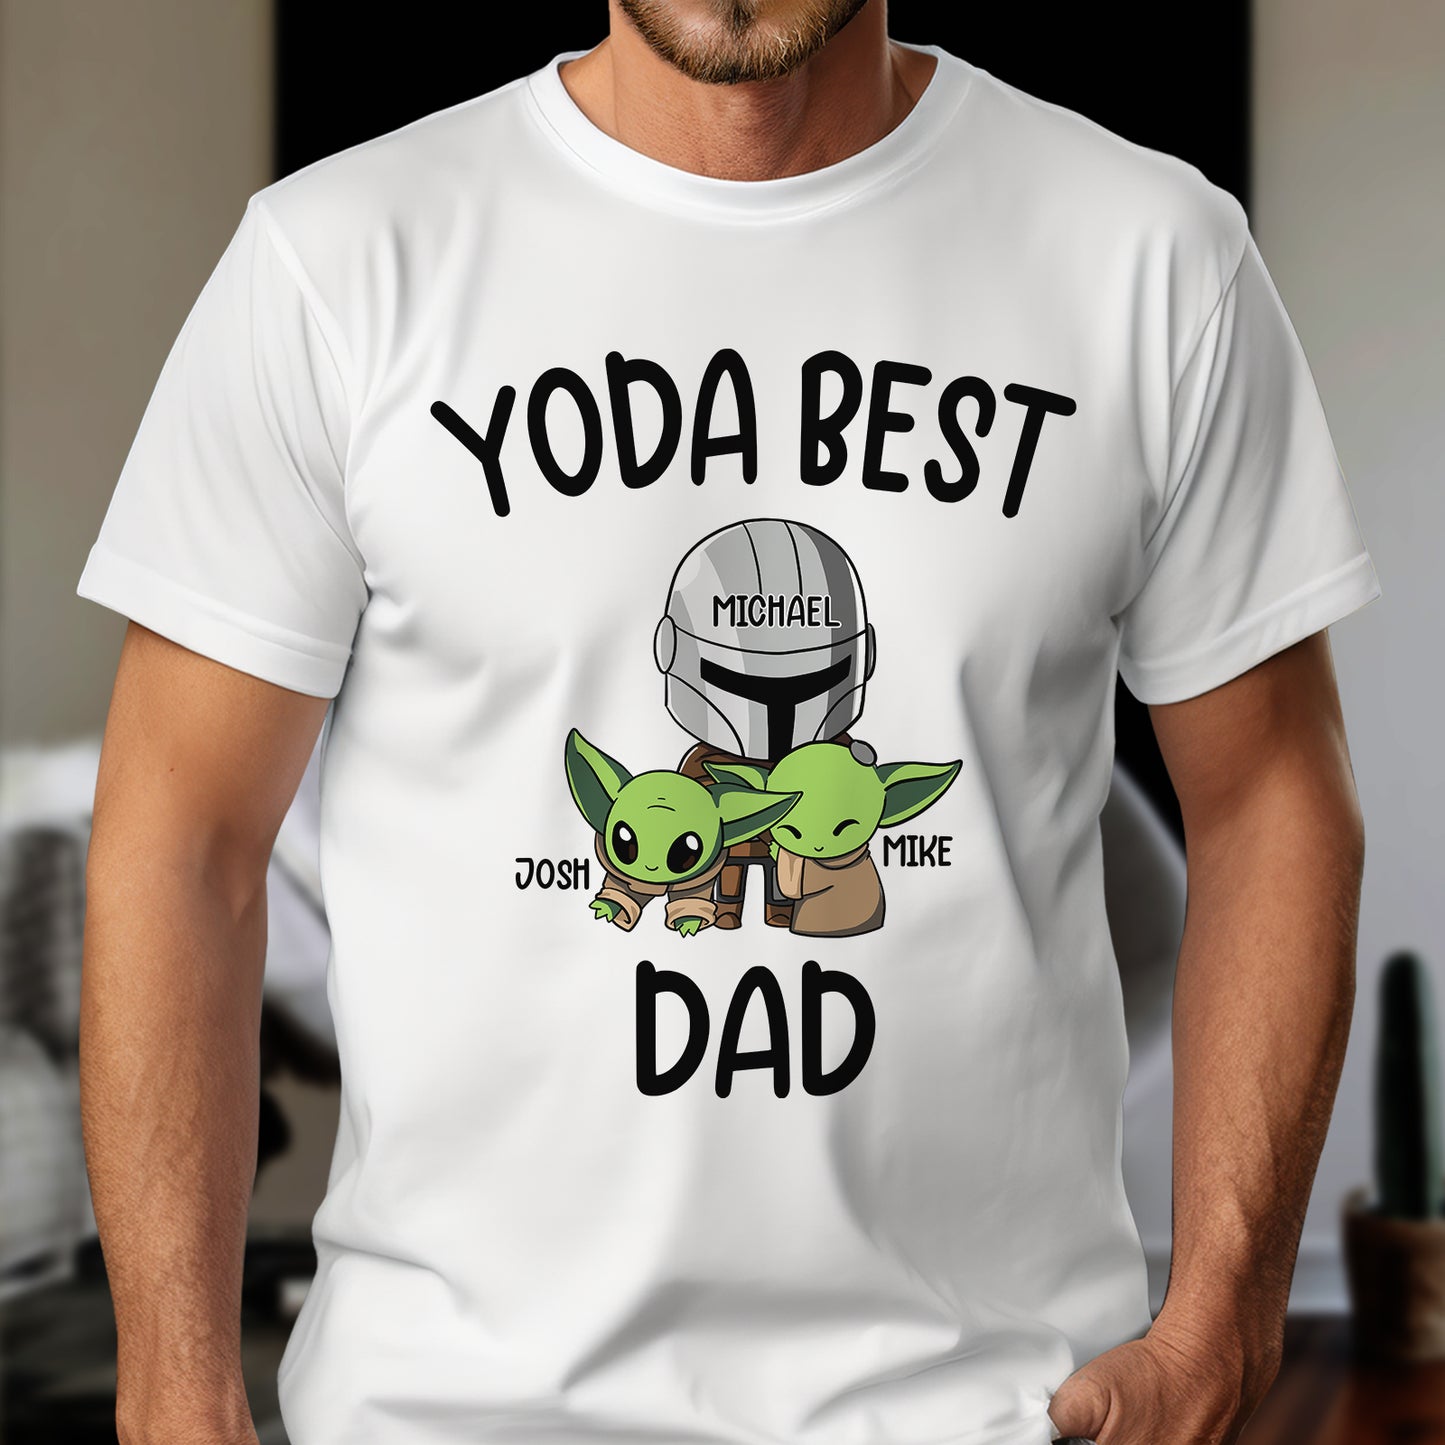 Father's Day - Best Dad In The Galaxy - Personalized Shirts